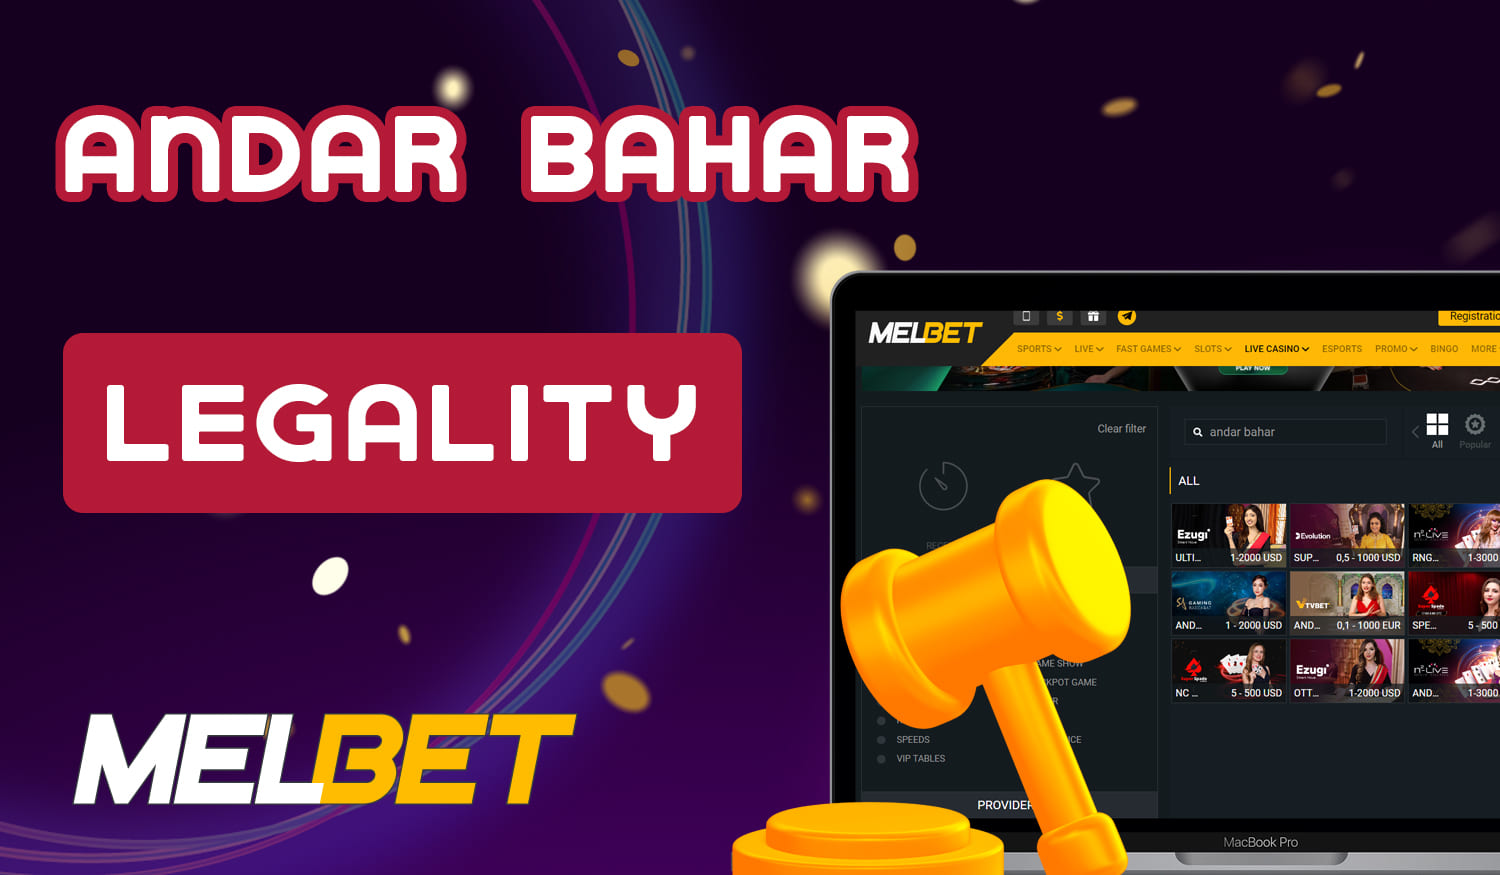 How legally Melbet users from India can play Andar Bahar on the site